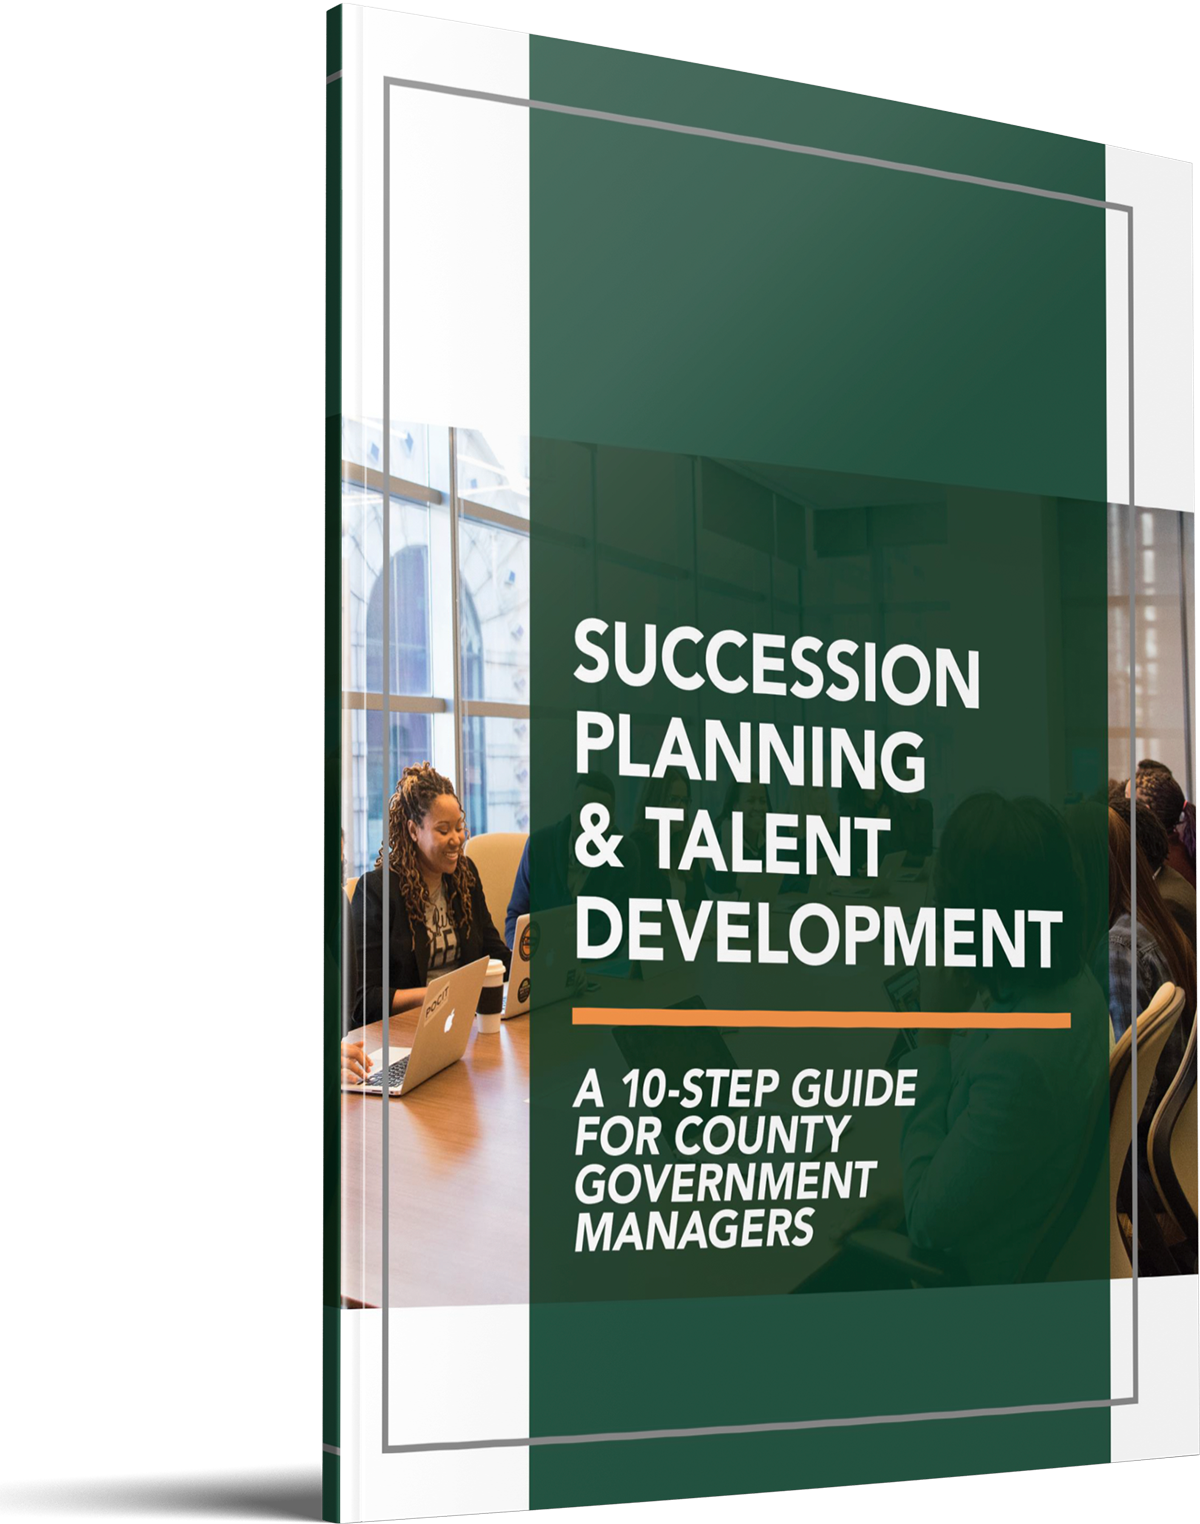 Succession Planning & Talent Development Guide: A 10-step Guide for County Government Managers